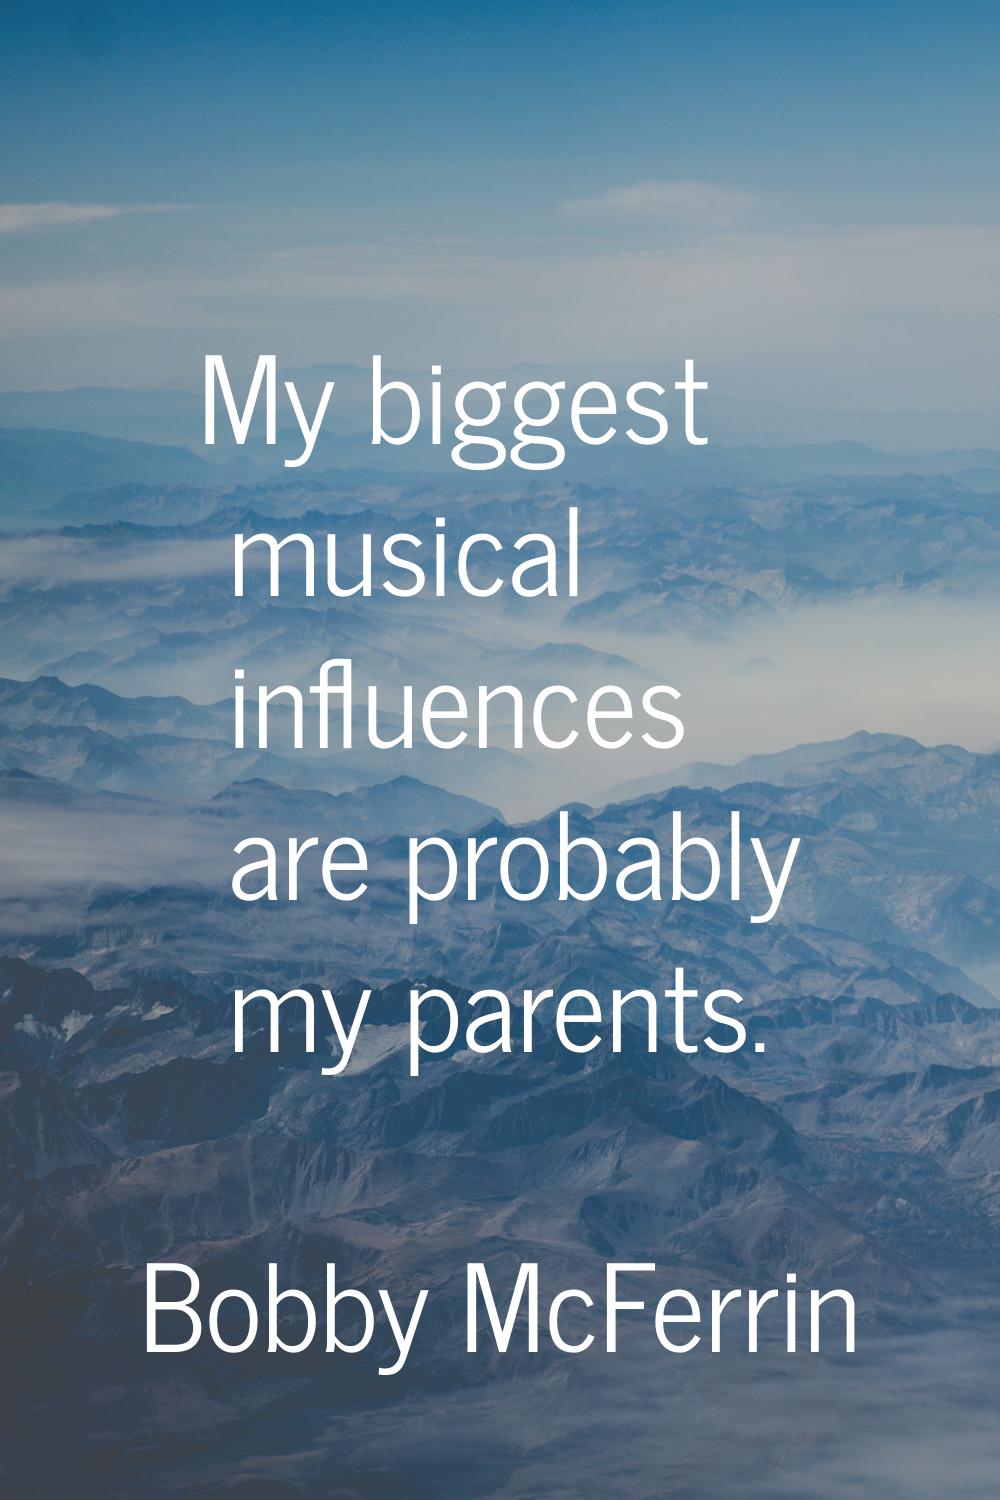 My biggest musical influences are probably my parents.